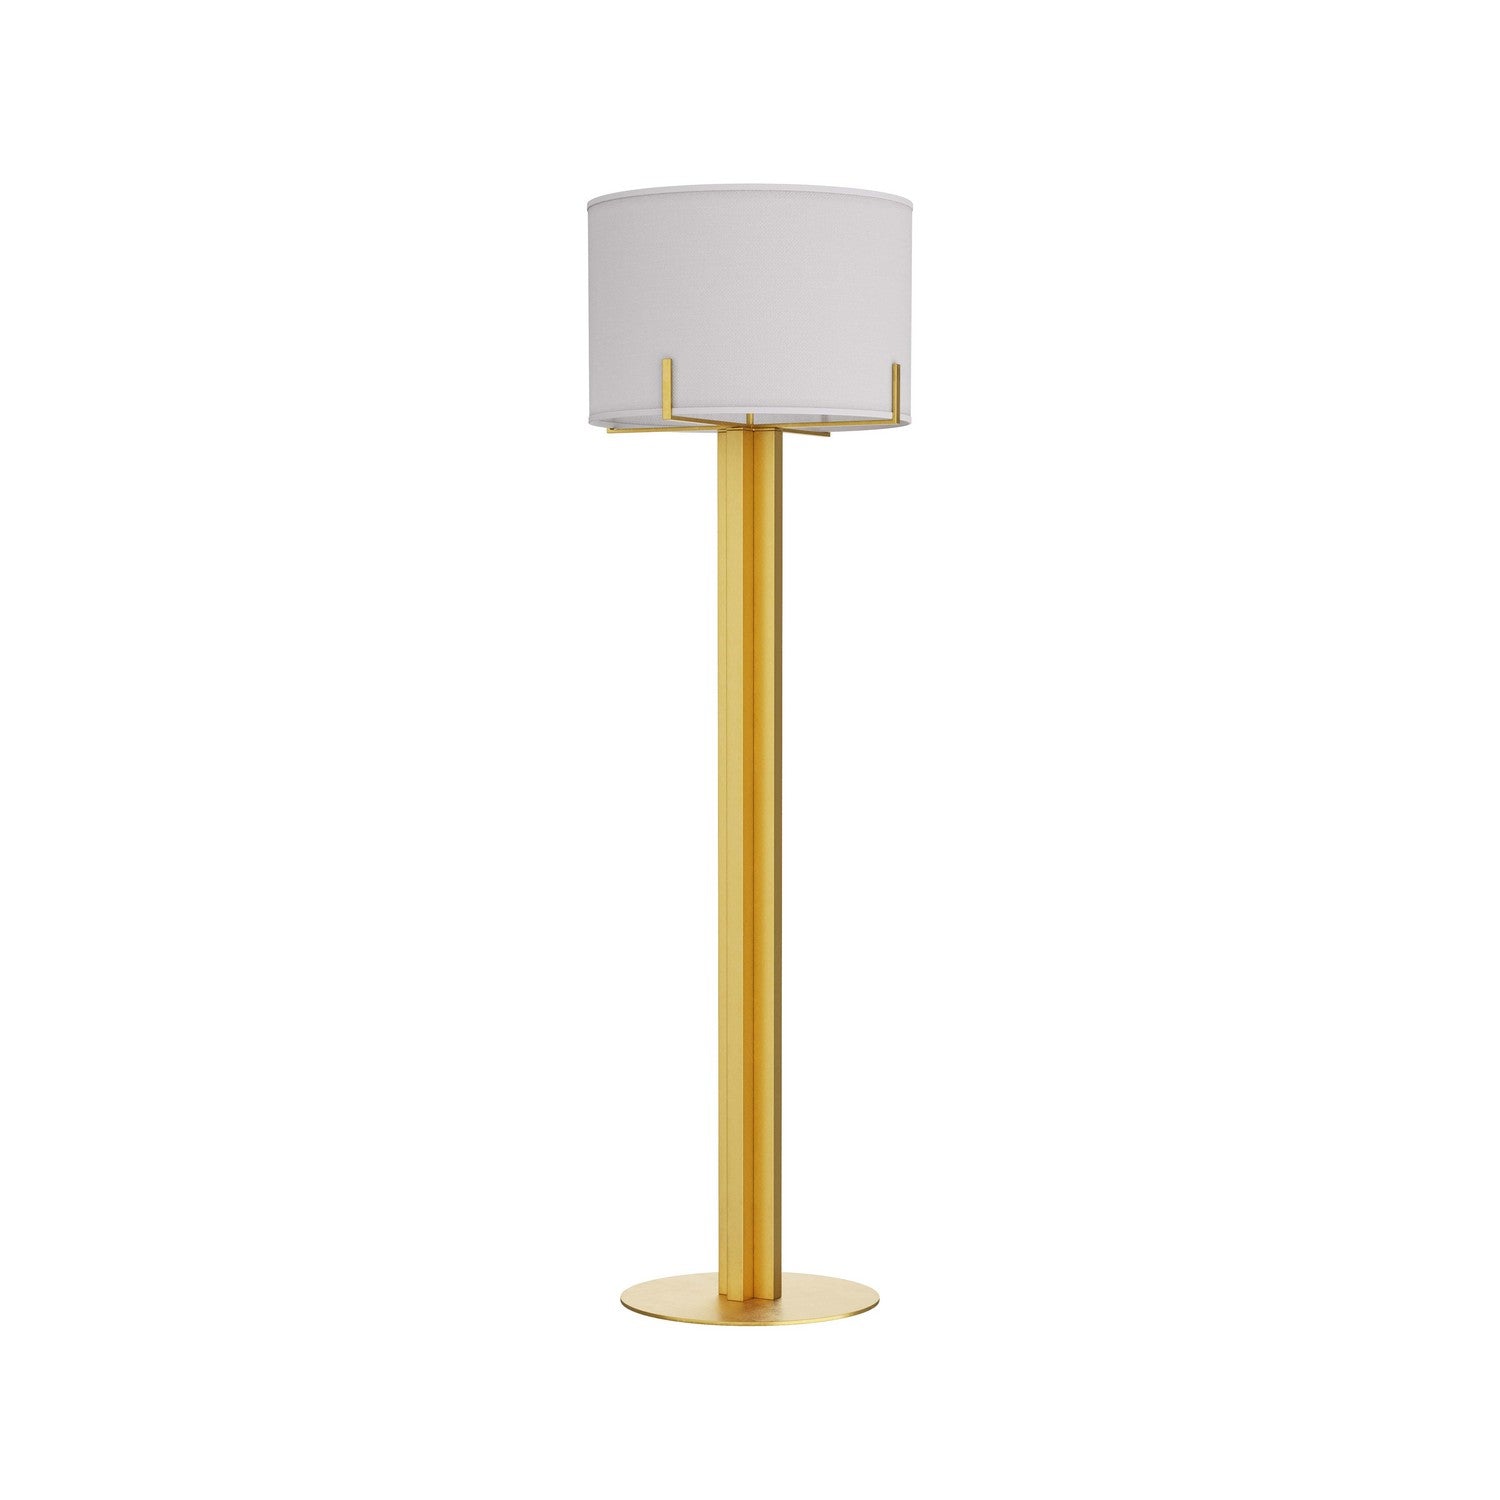 One Light Floor Lamp from the Valiant collection in Antique Brass finish